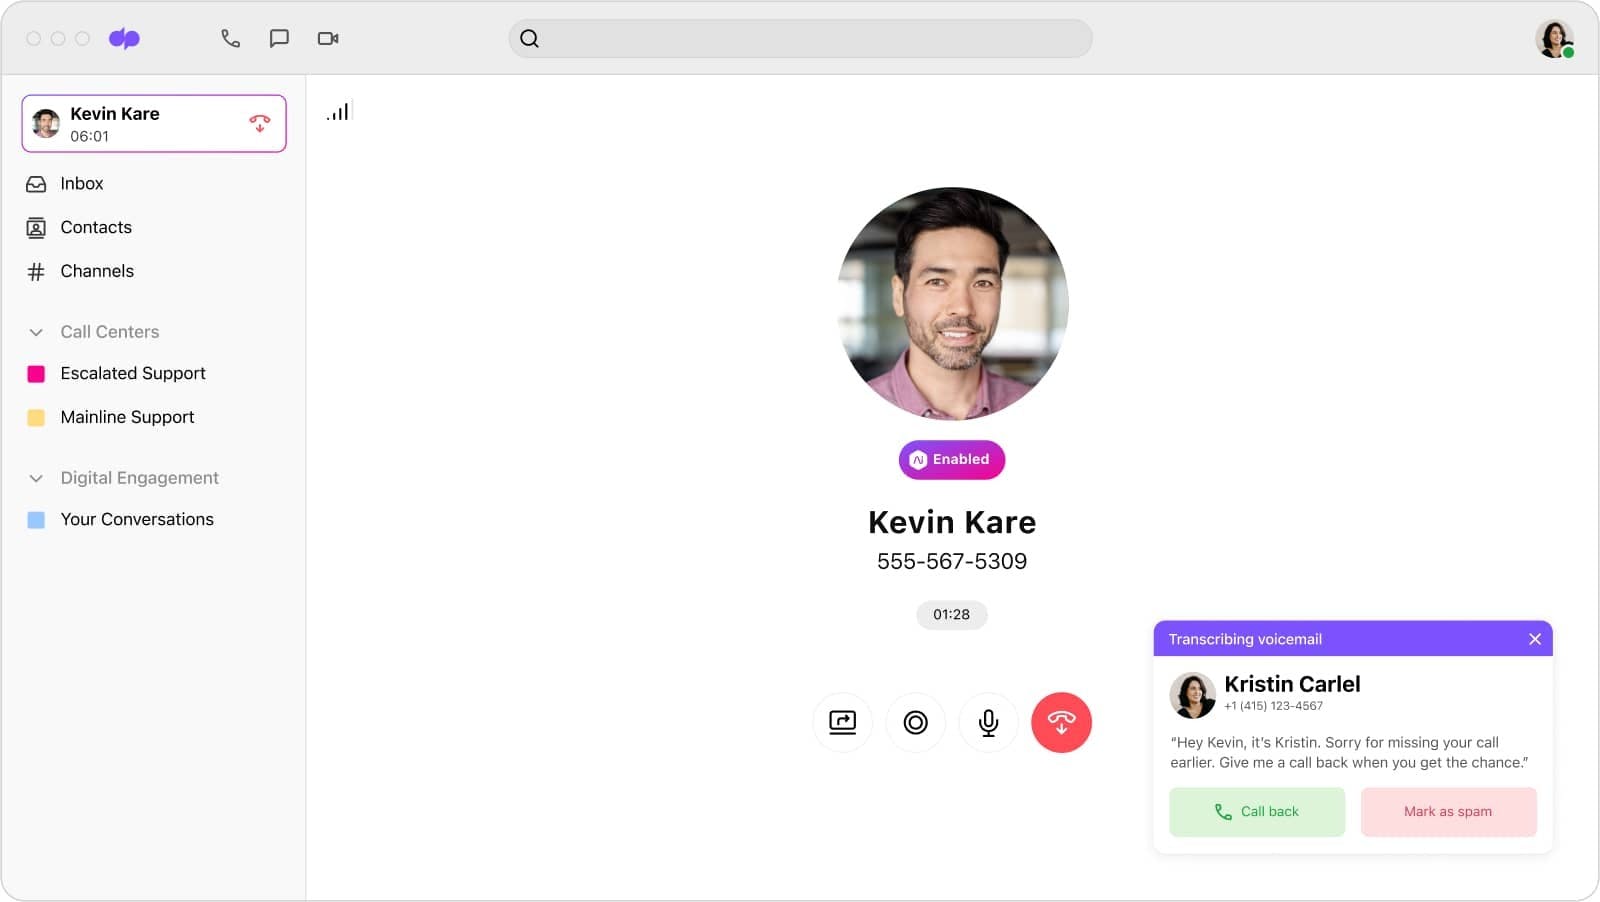 Screenshot of Dialpad Ai transcribing a voicemail message in real time